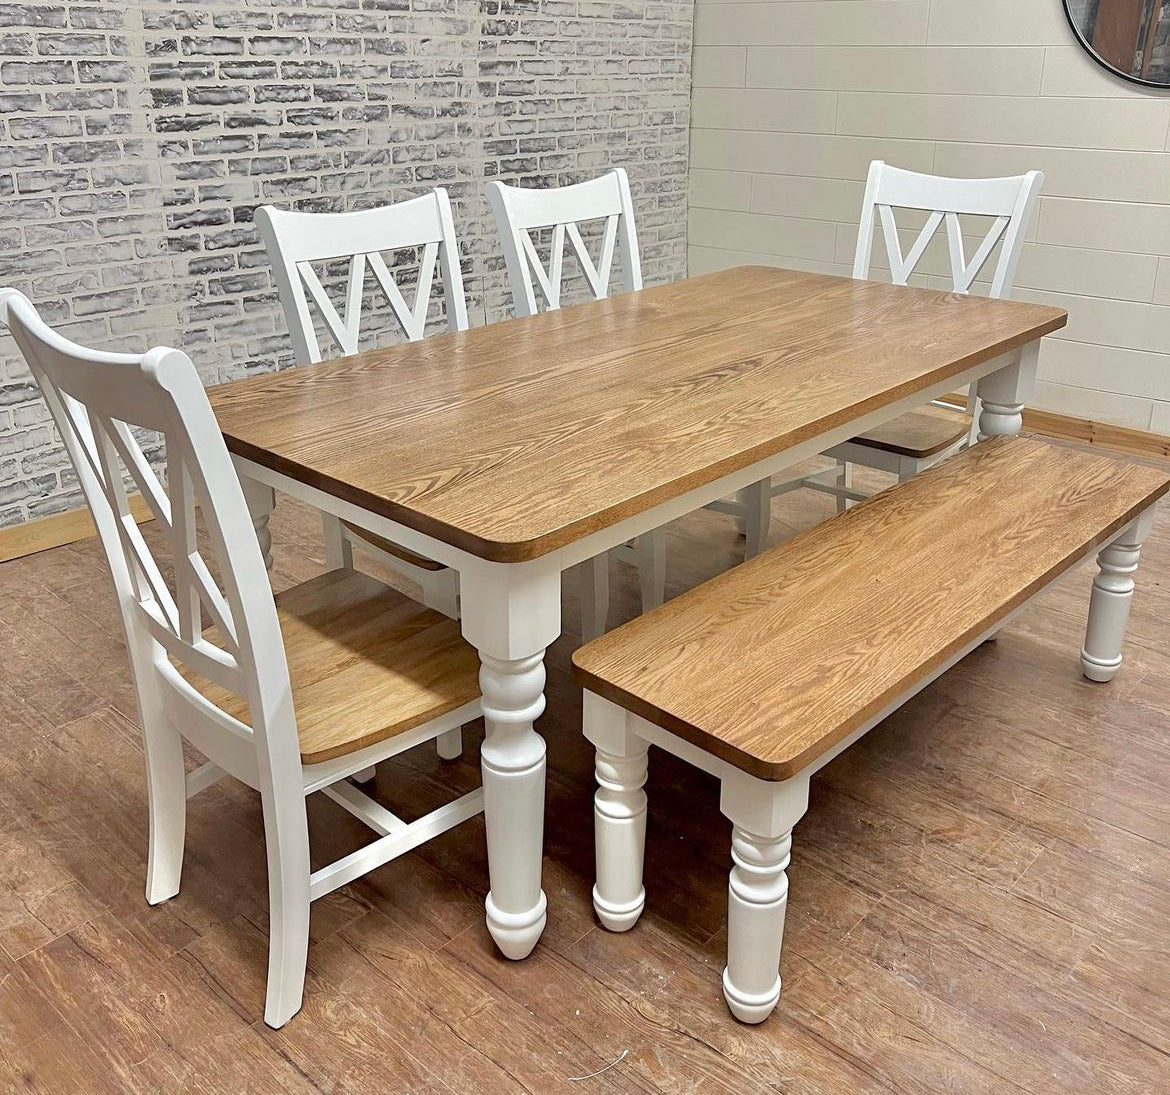 Pictured with a 6' L x 42" W Red Oak top with Rounded Corners stained Early American and a White painted base. Pictured with a Matching Bench and four Double Cross Back Chairs.